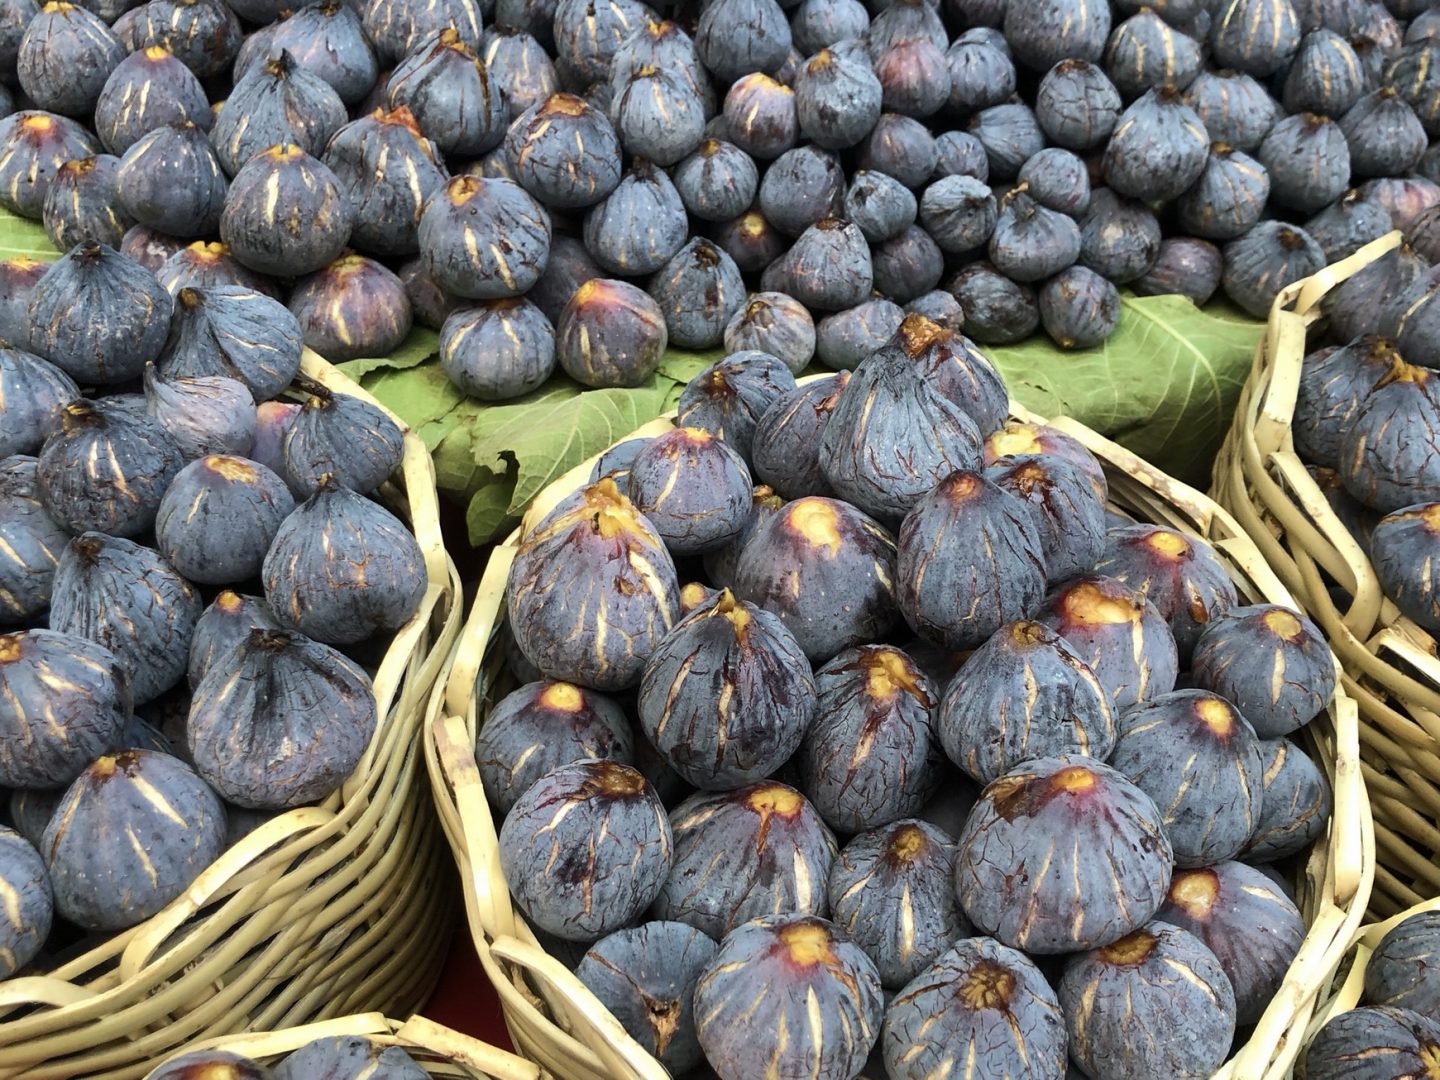 A basket of figs at the souk in Fez, Morocco.